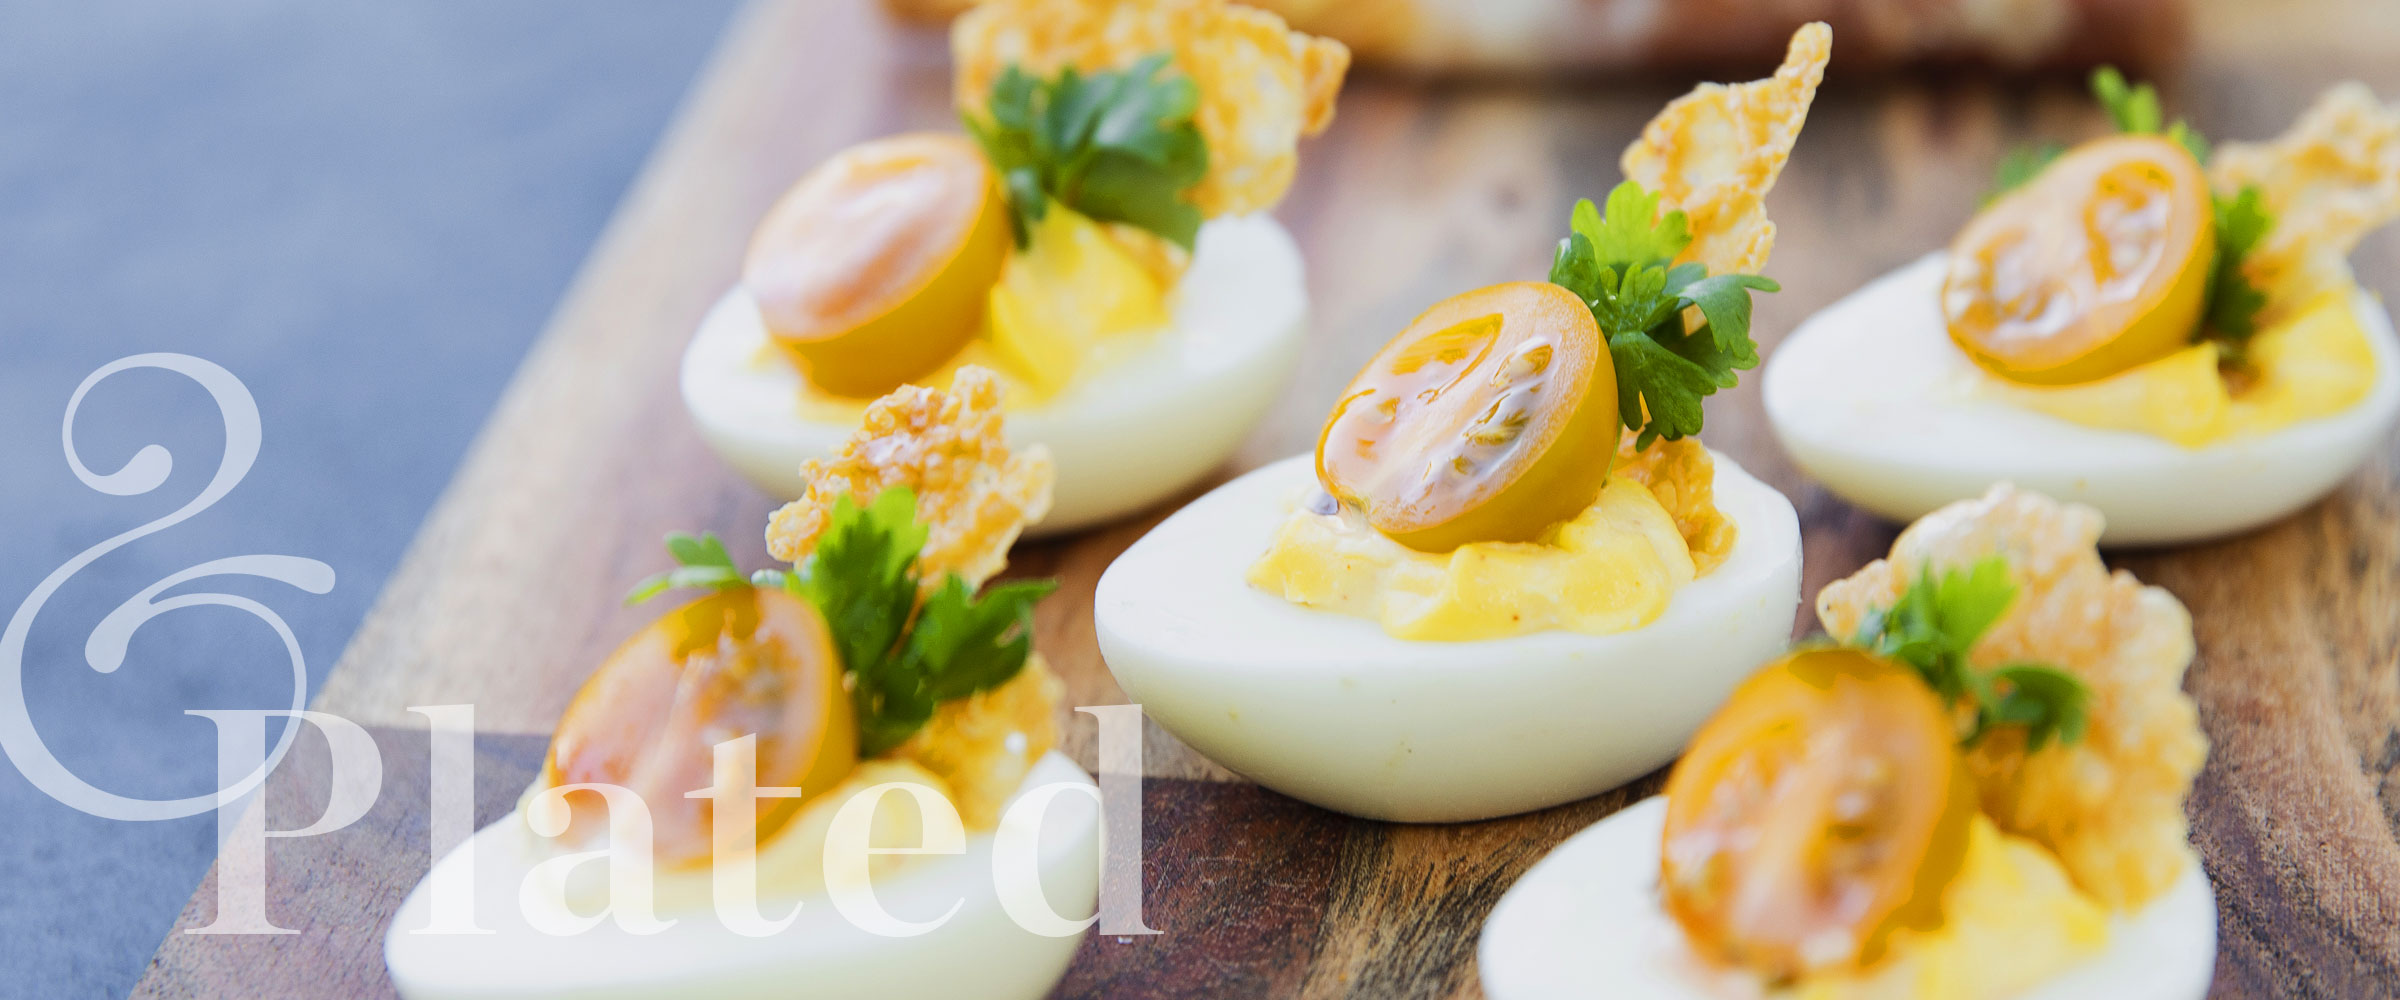 deviled eggs Image with Text Overview - desktop version